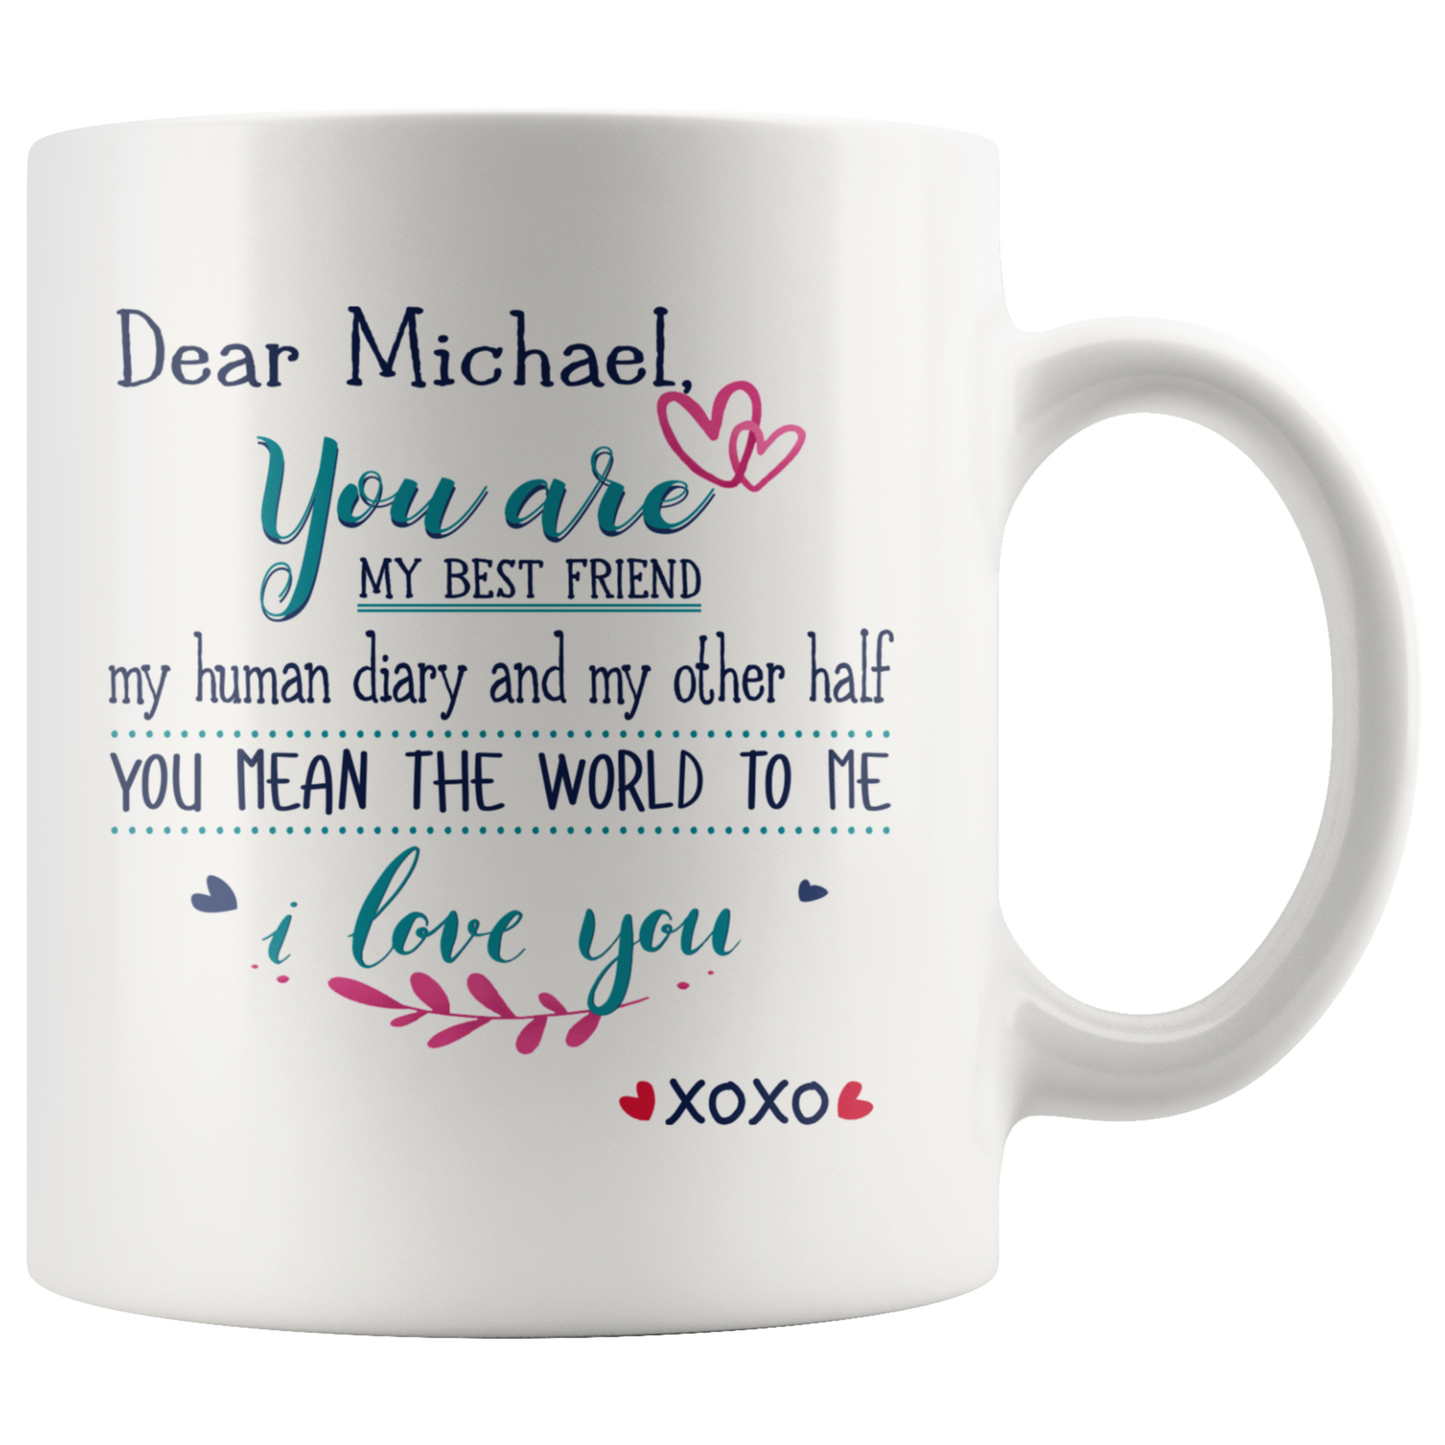 ND20436581-sp-18595 - Christmas Gifts For Husband - Dear Michael You Are My Best F